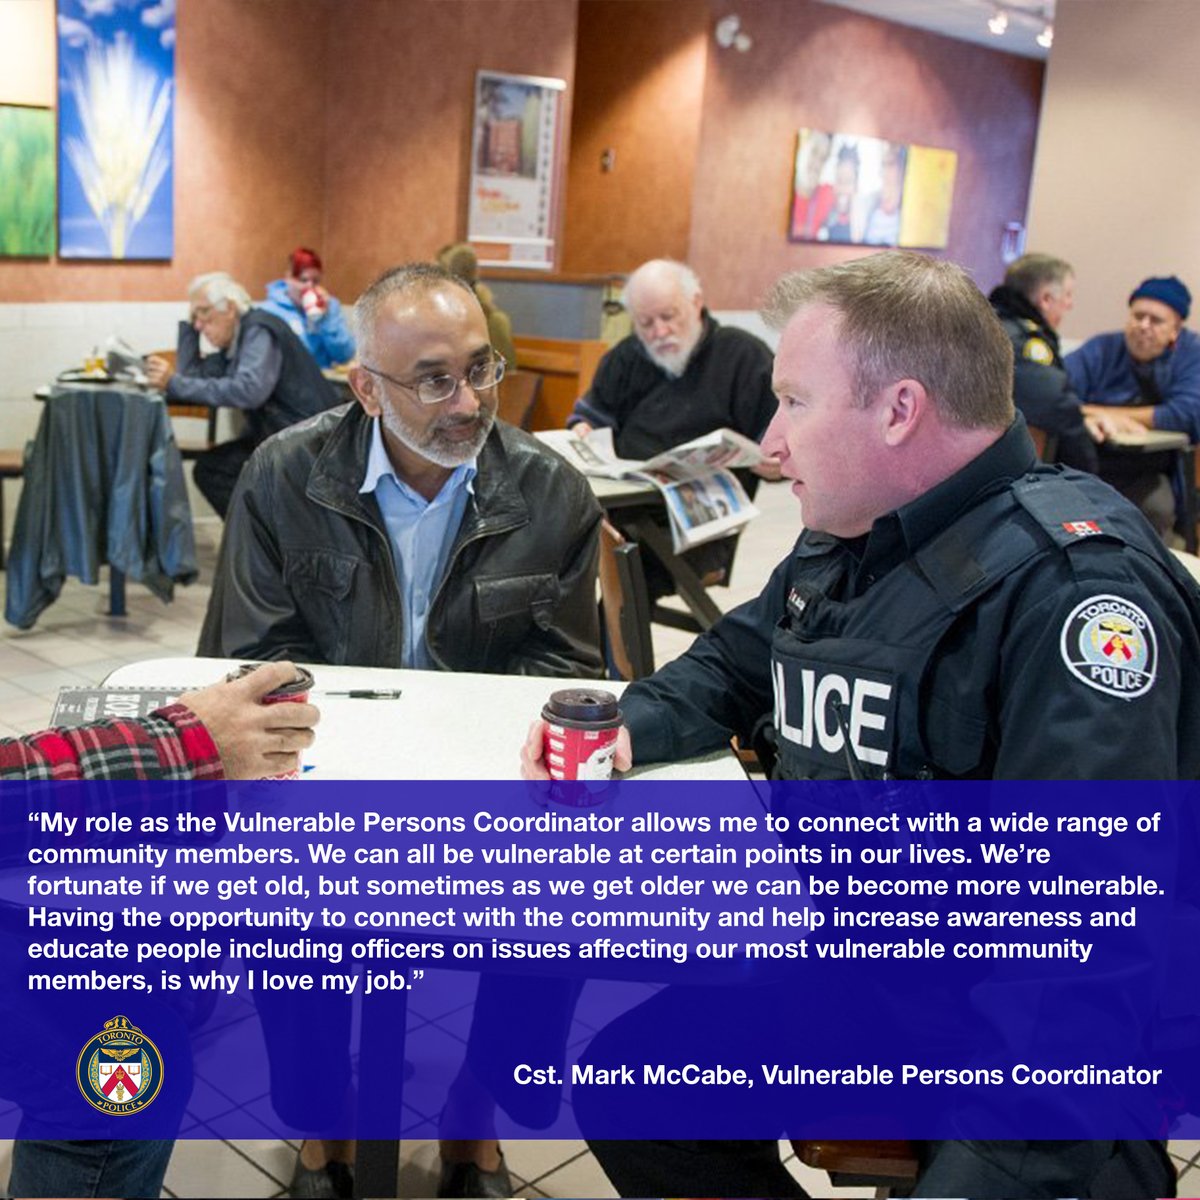 Meet Constable Mark McCabe, your Vulnerable Persons Coordinator. He helps increase awareness and educate seniors and vulnerable persons in the community on policing and works with divisions on issues affecting the city's vulnerable population.